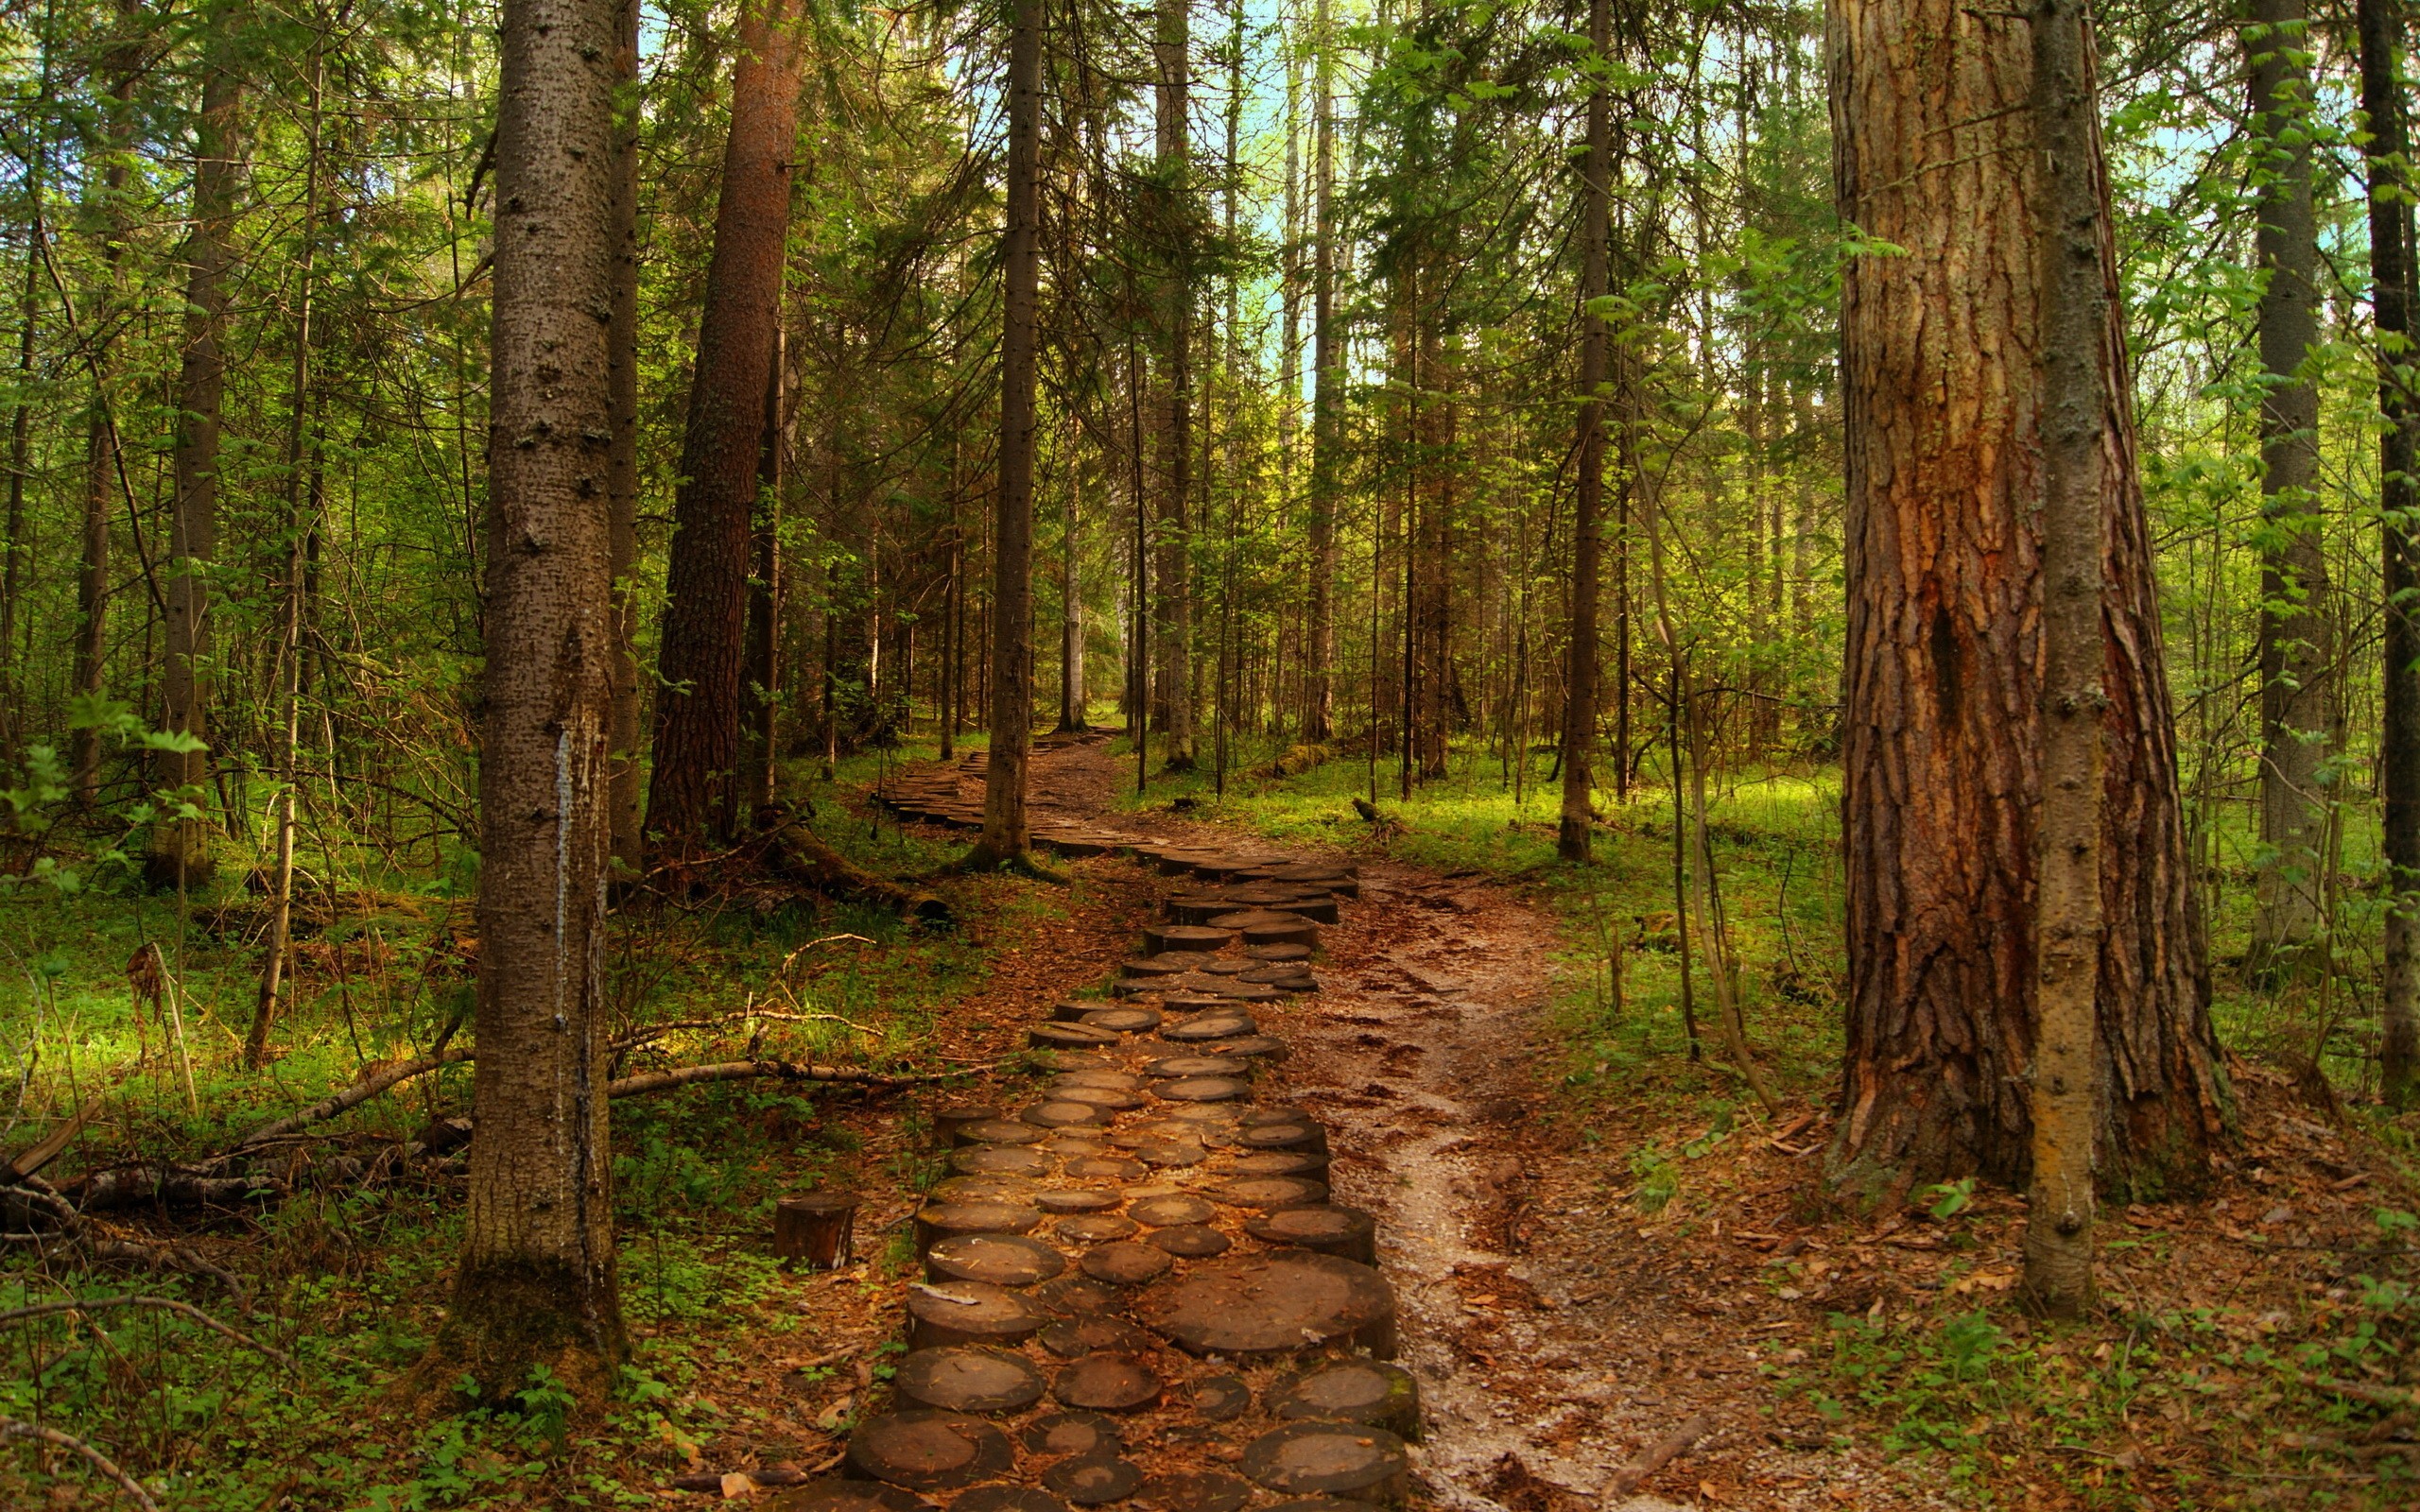 landscapes, Forest, Hdr, Woods, Trunks, Path, Trail Wallpaper